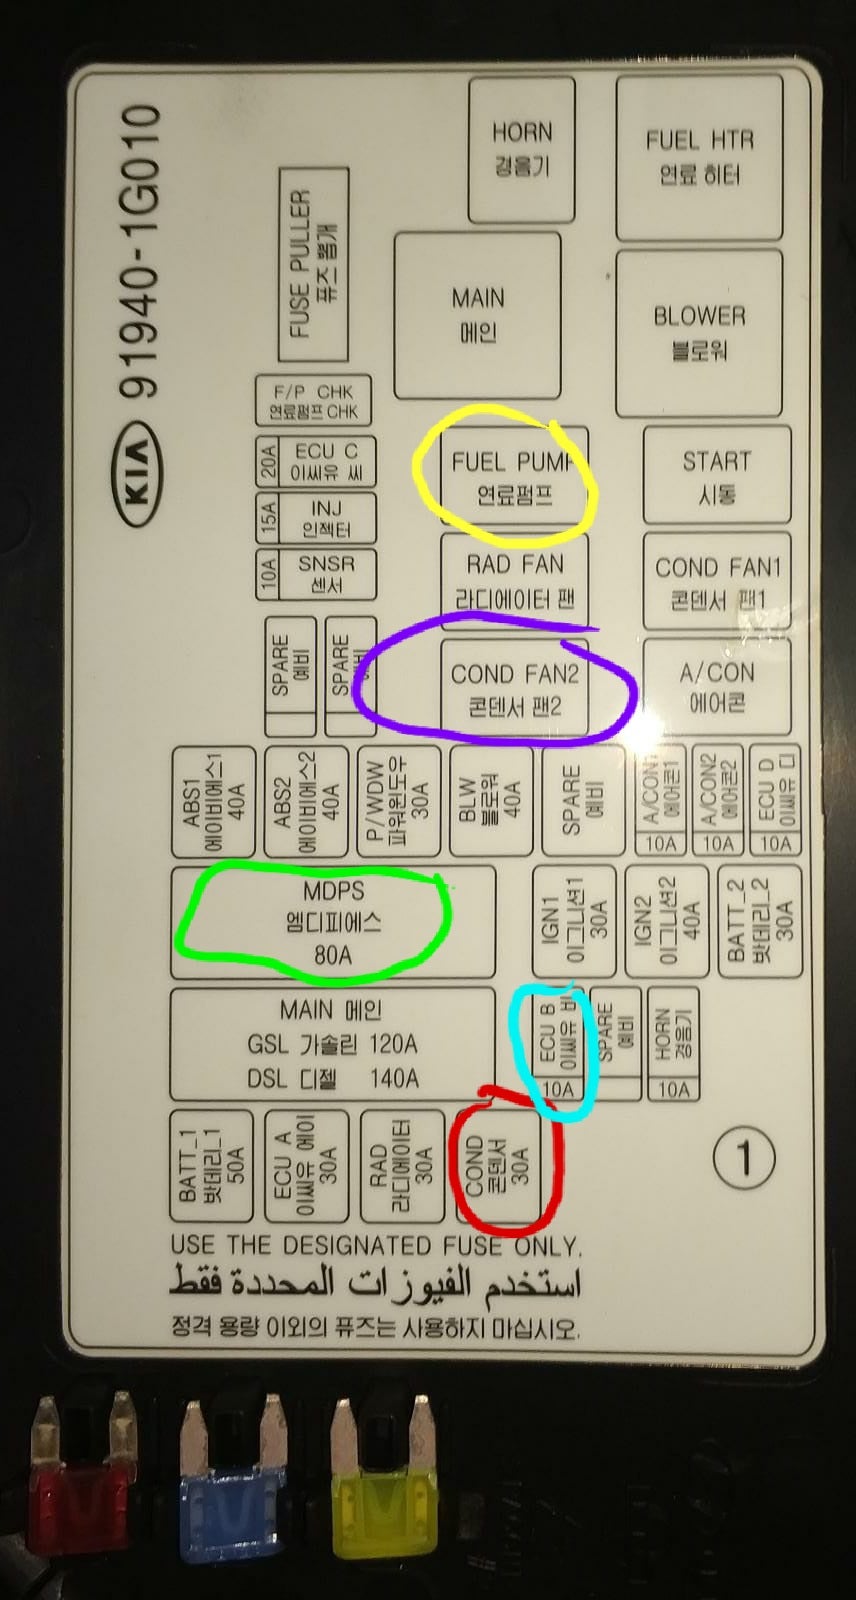 Missing Fuses and Relays - Fuse Diagram Explained | Kia Owners Club Forum